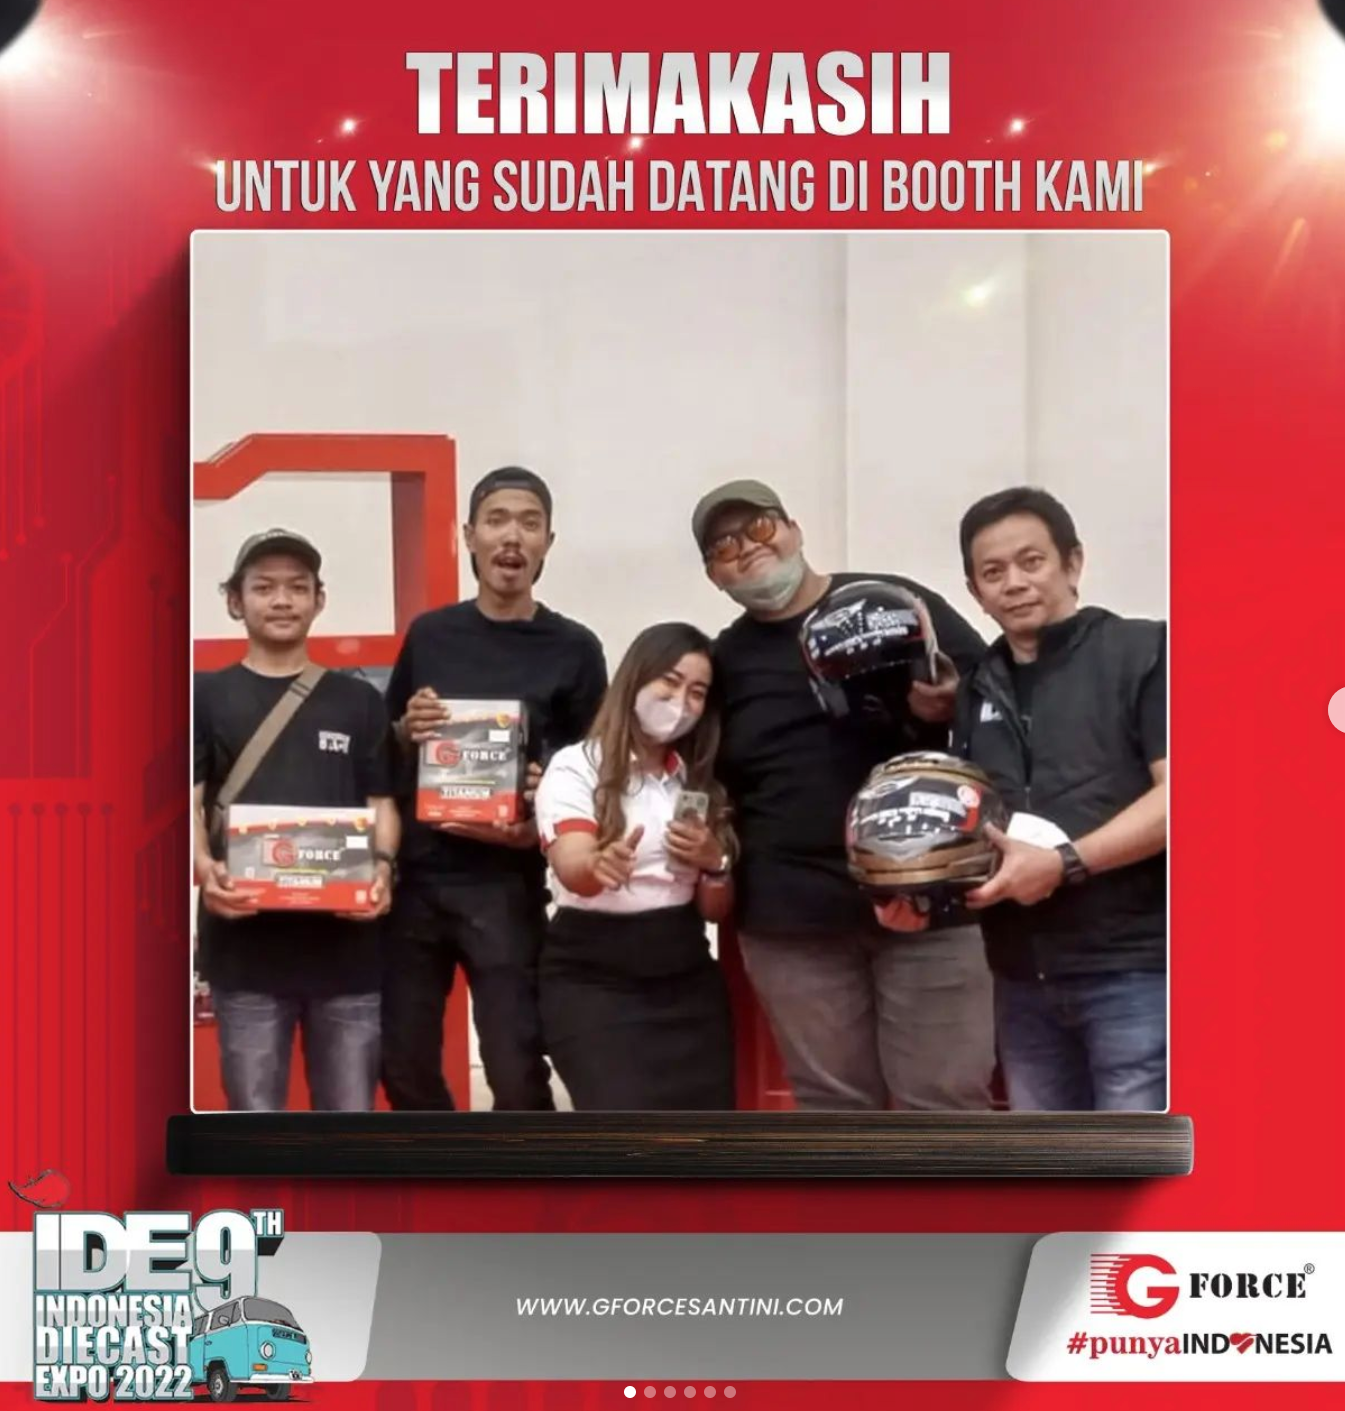 g-force-event-di-indonesia-diecast-expo-9-tahun-2022